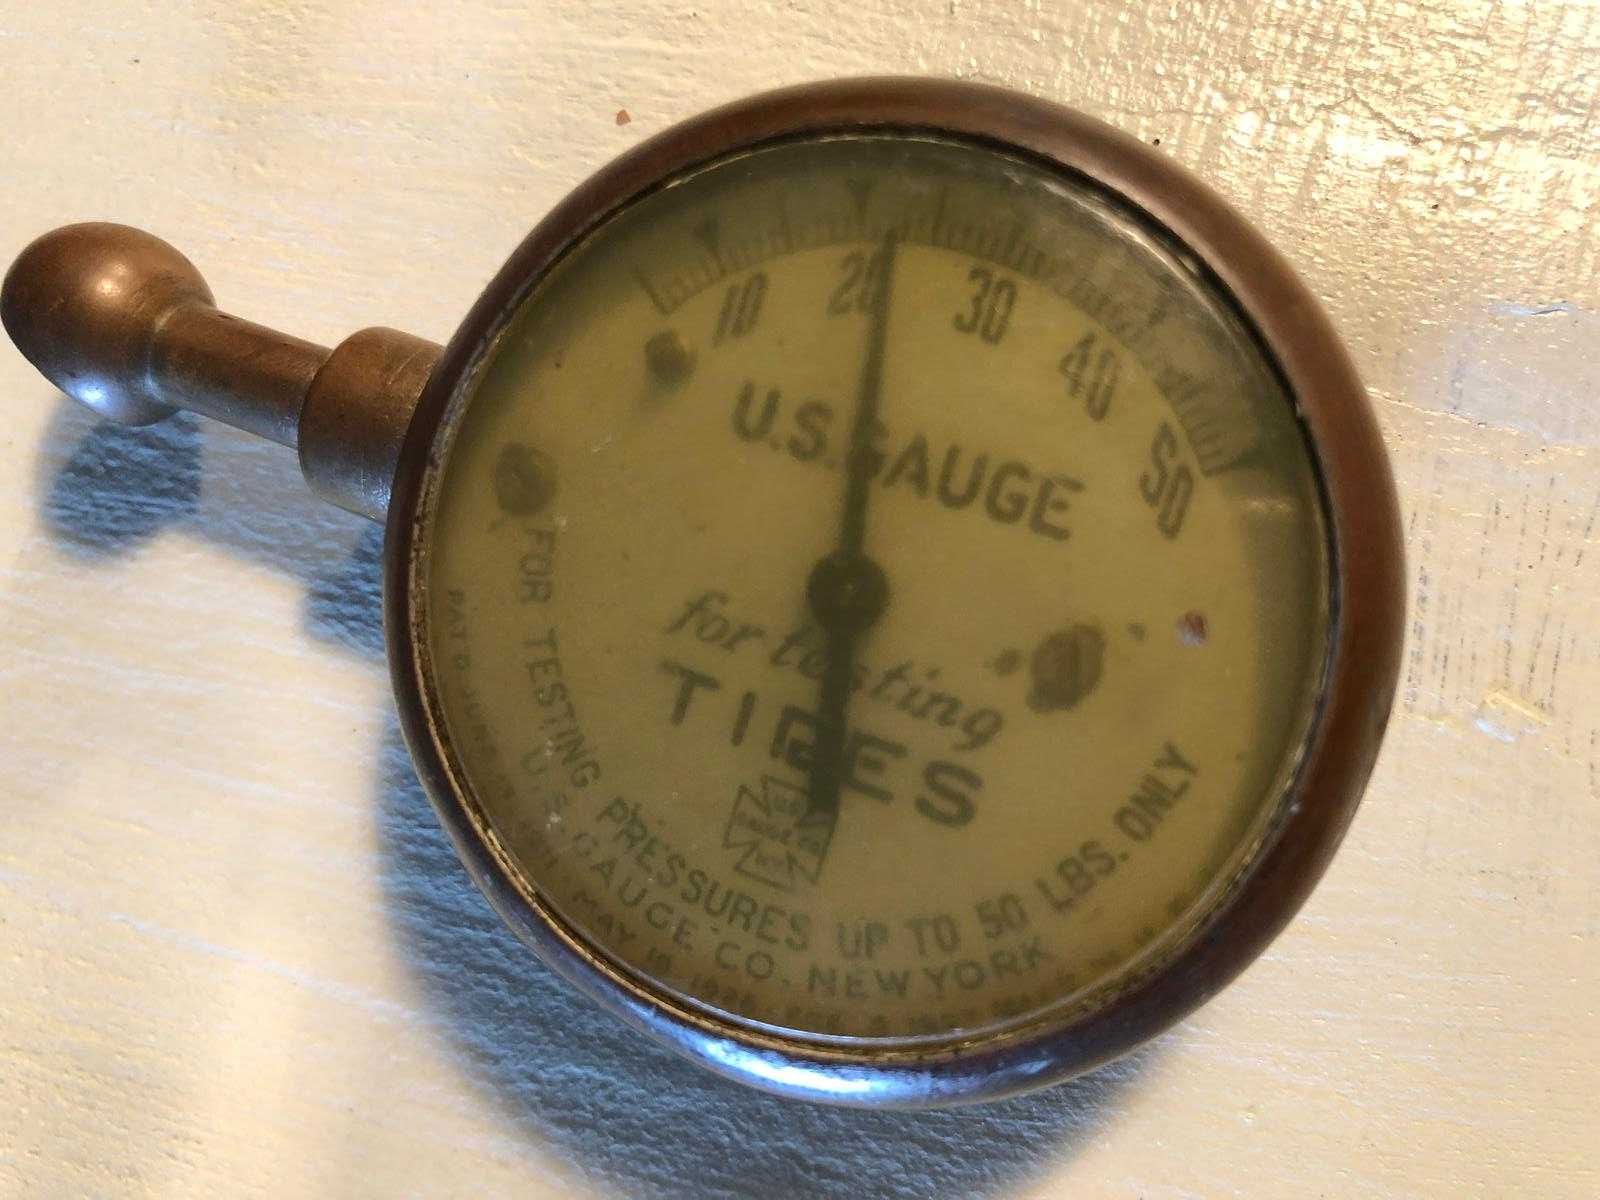 Vintage US Guage Tire Pressure Tester Balloon or Standard Tires